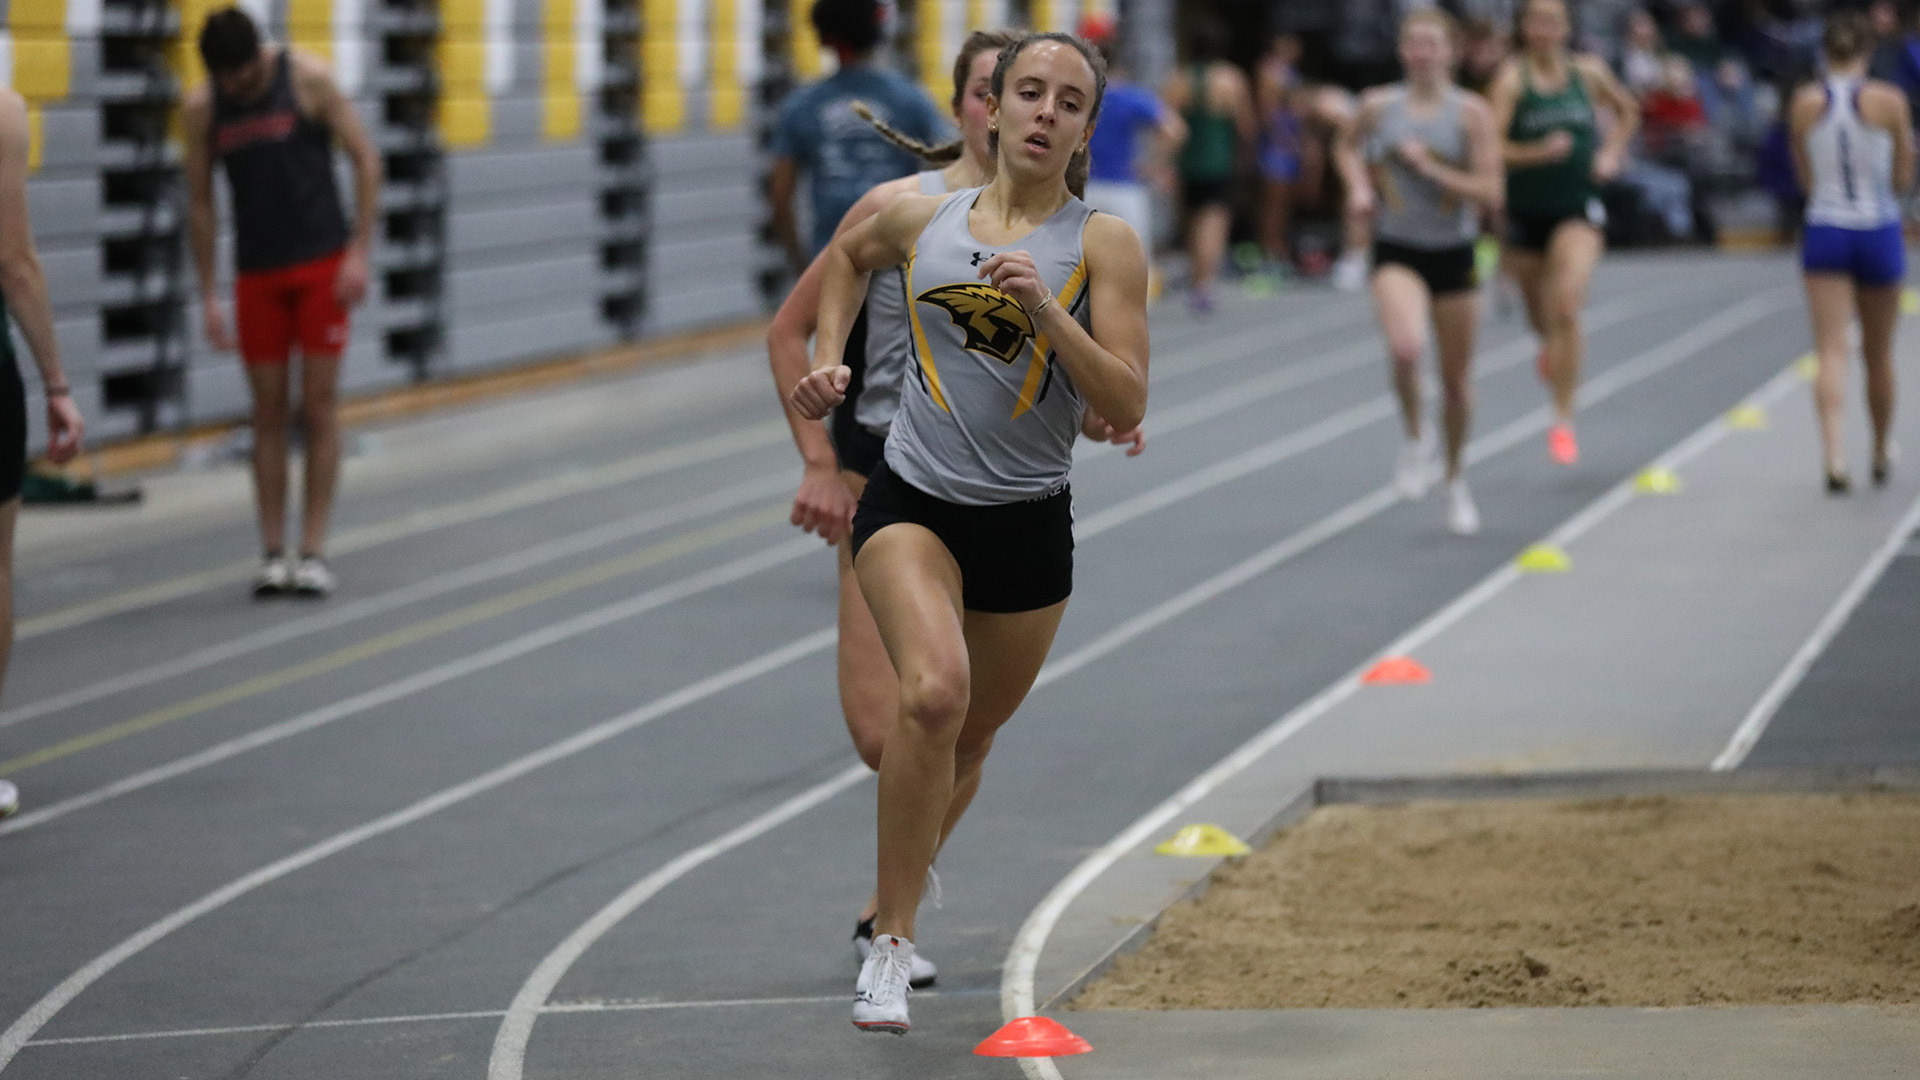 Alexandria Demco won the 400-meter run at the "Squig" Converse Invitational with the nation's 15th-fastest time (59.03).